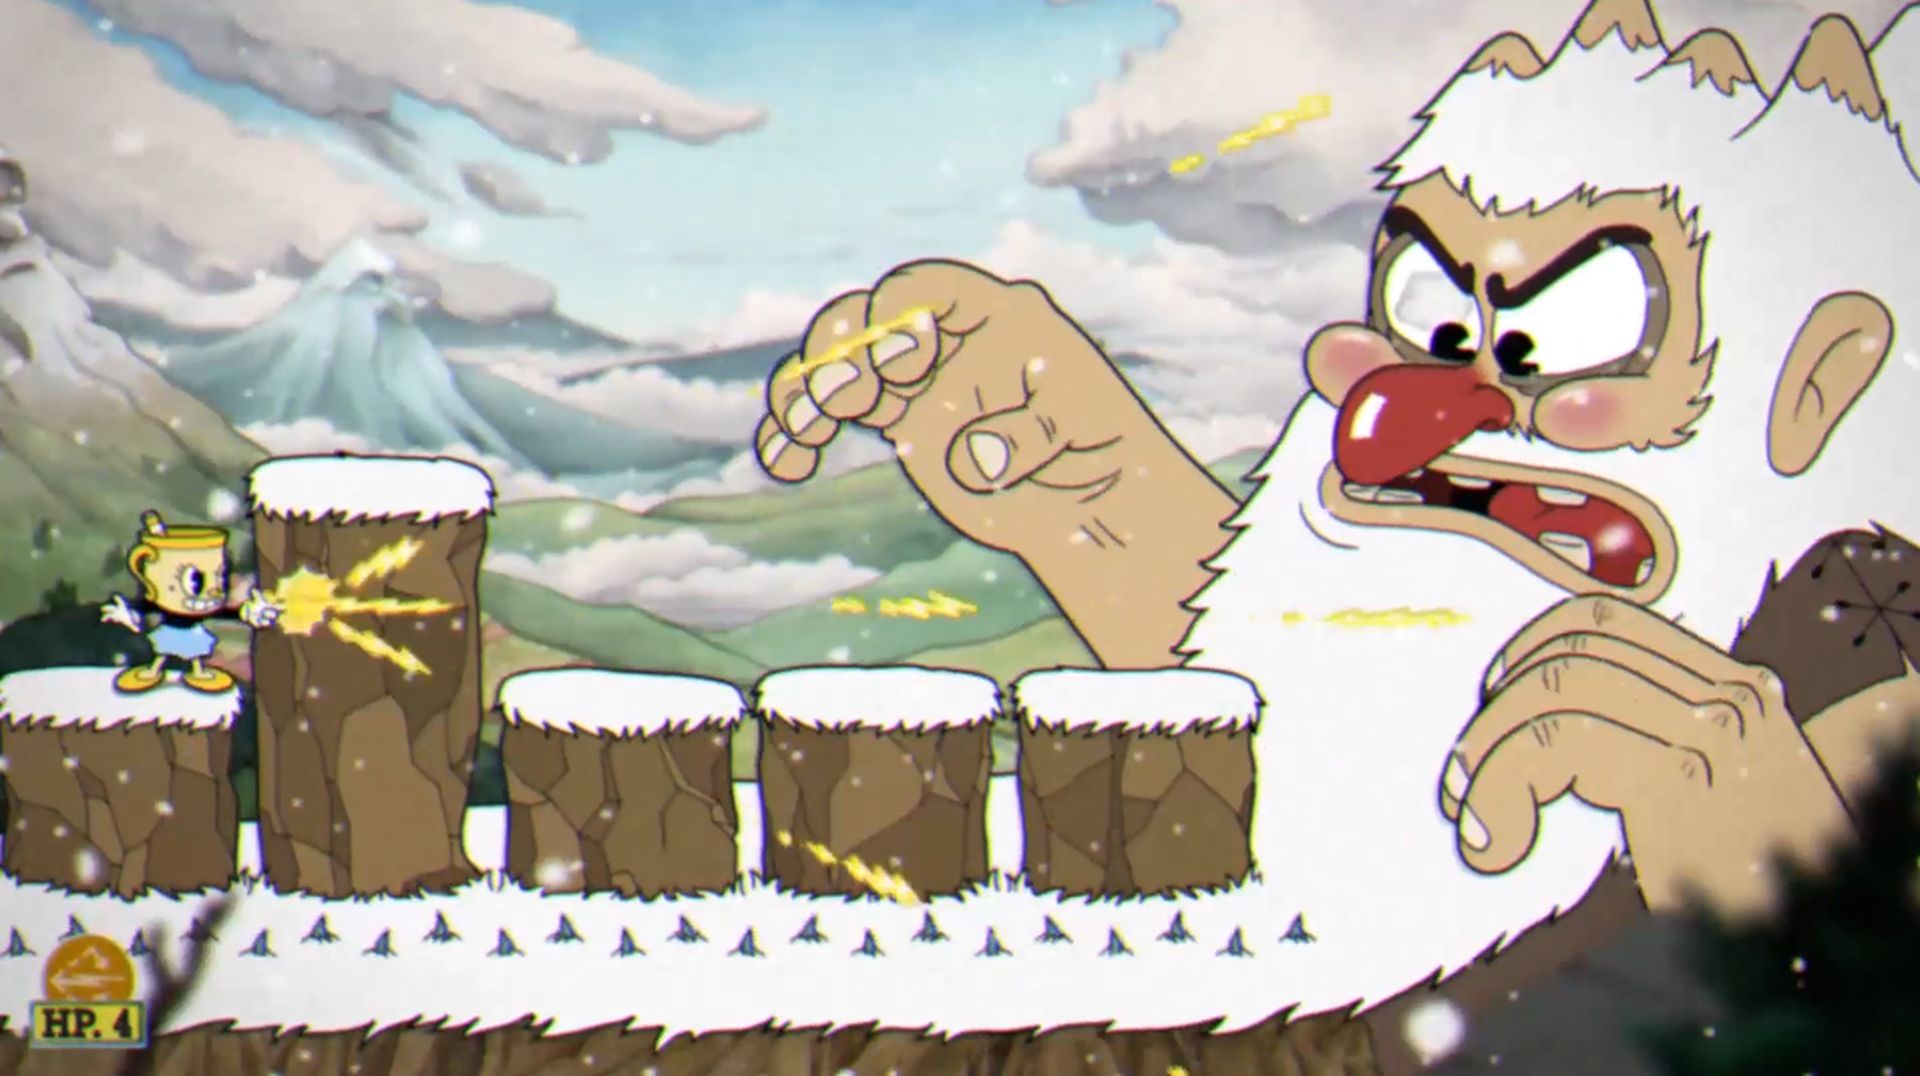 In order to finish the game, you better check out our Cuphead DLC all bosses list.